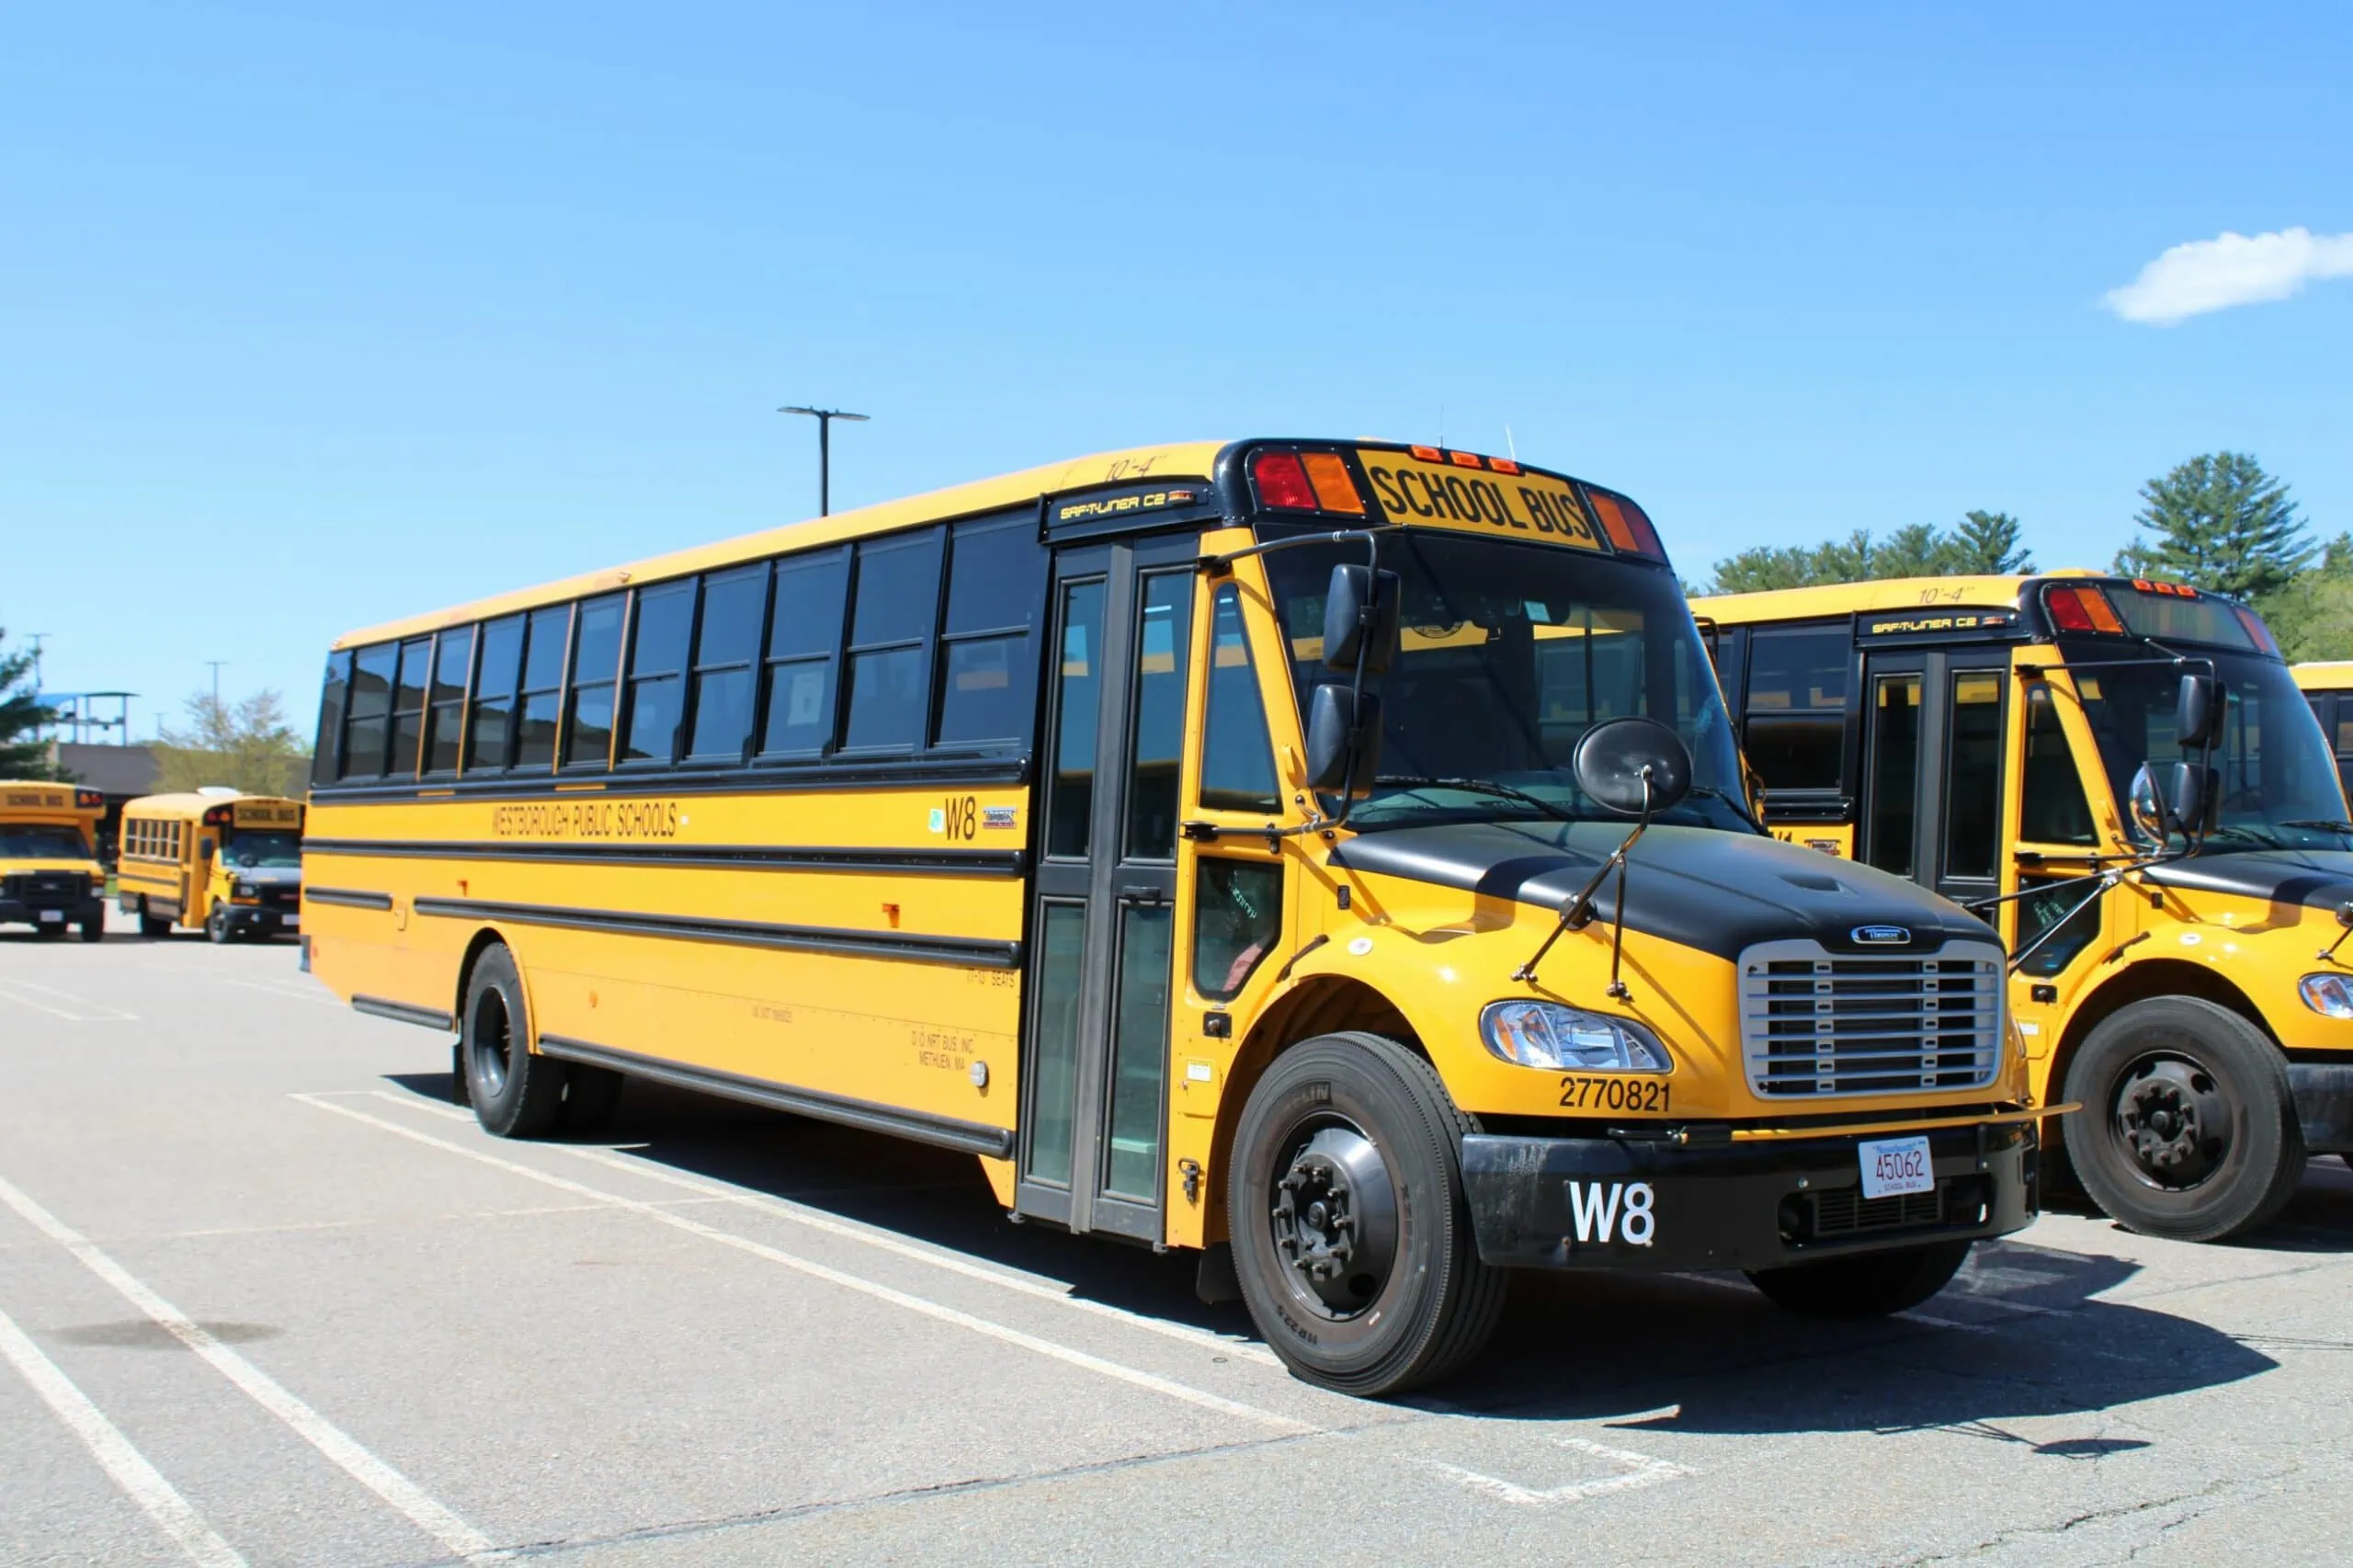 Buses continue to roll in Westborough as Marlborough drivers strike